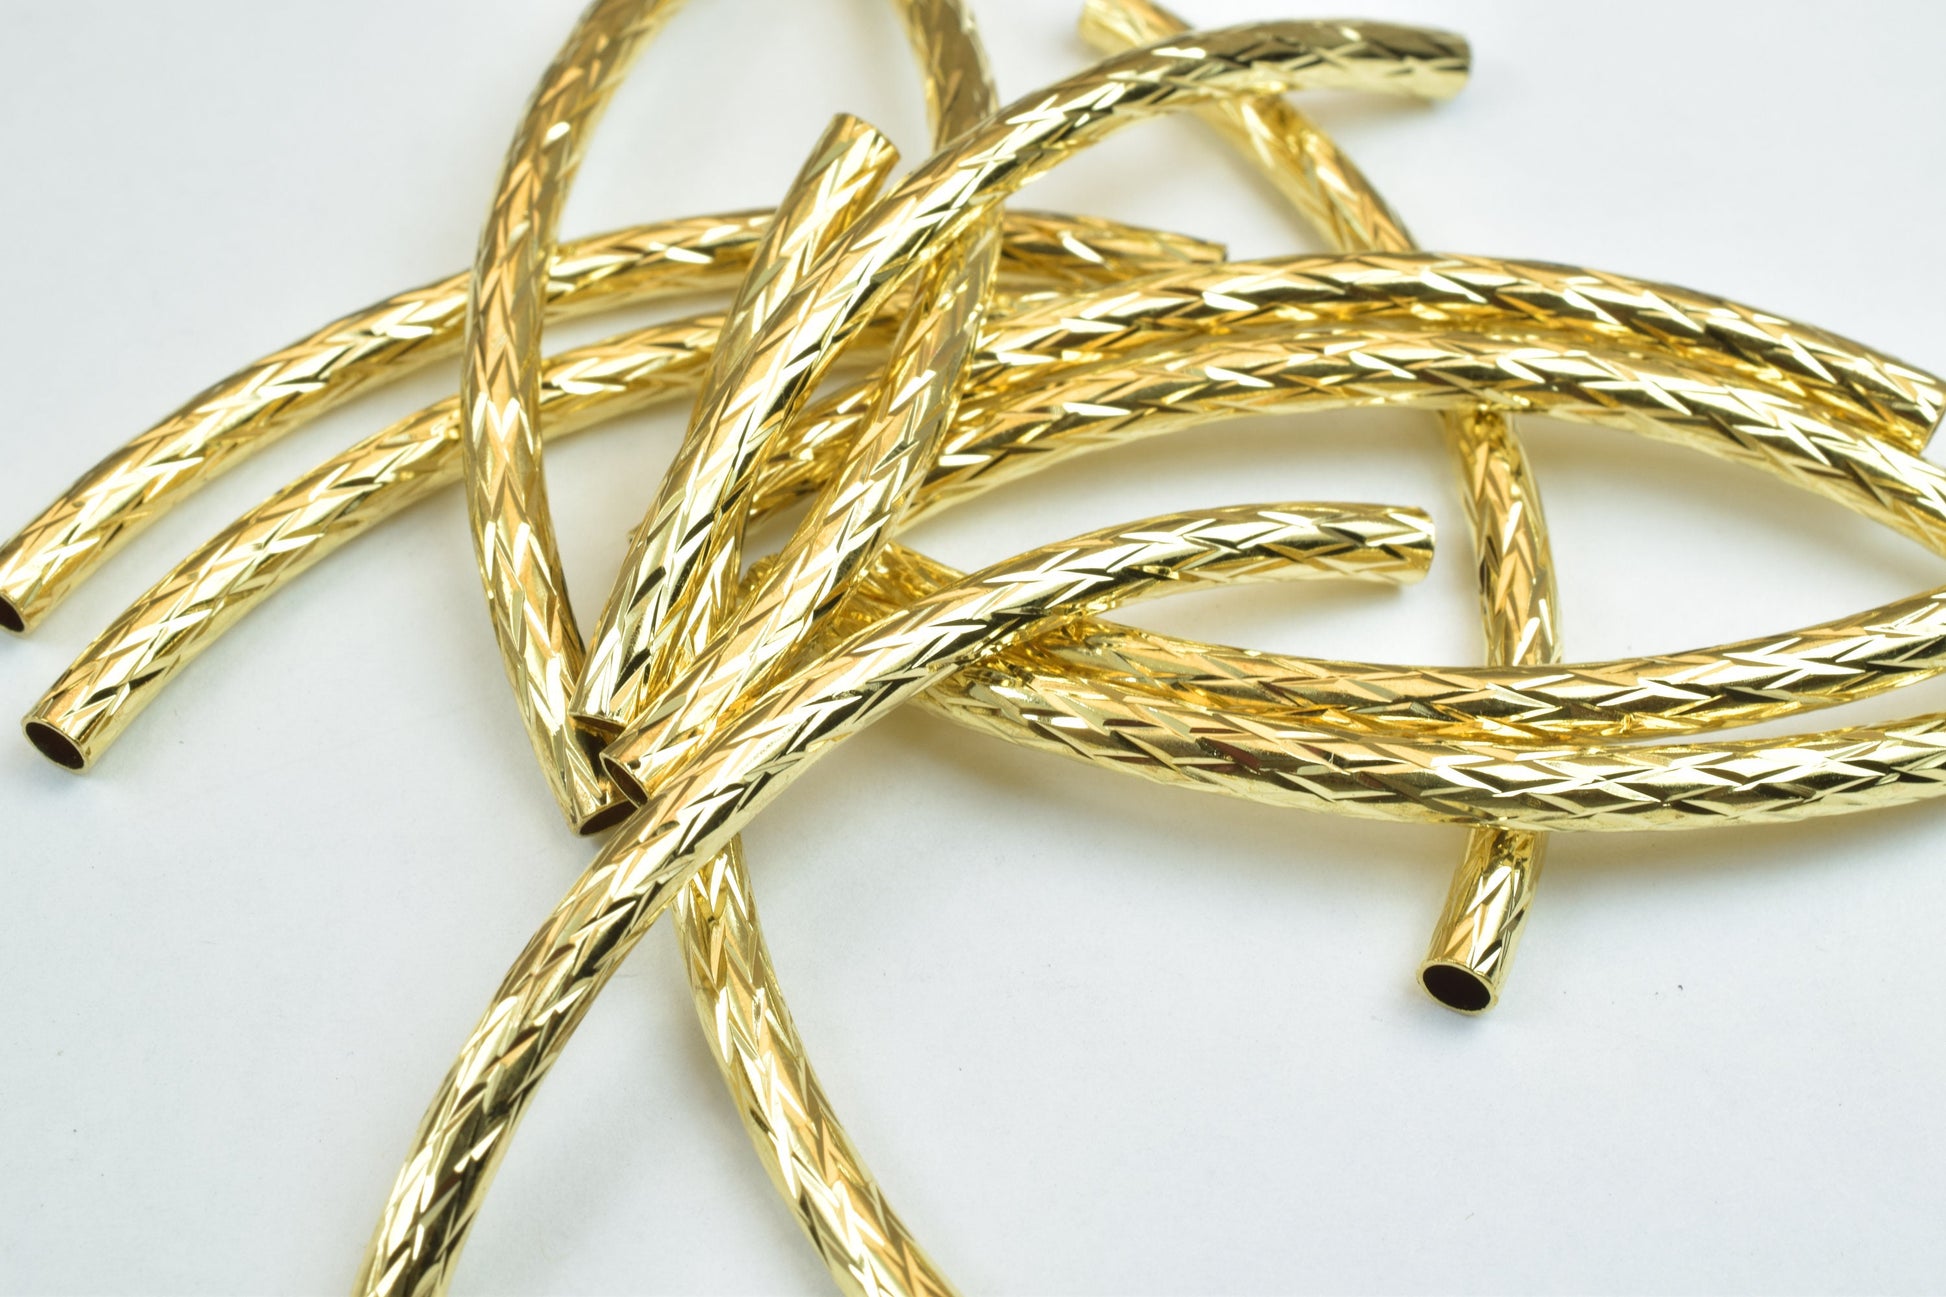 12 PCs Curve Tube Jewelry Finding Beads Size 3x50mm Diamond Cut Gold/Silver For Jewelry Making